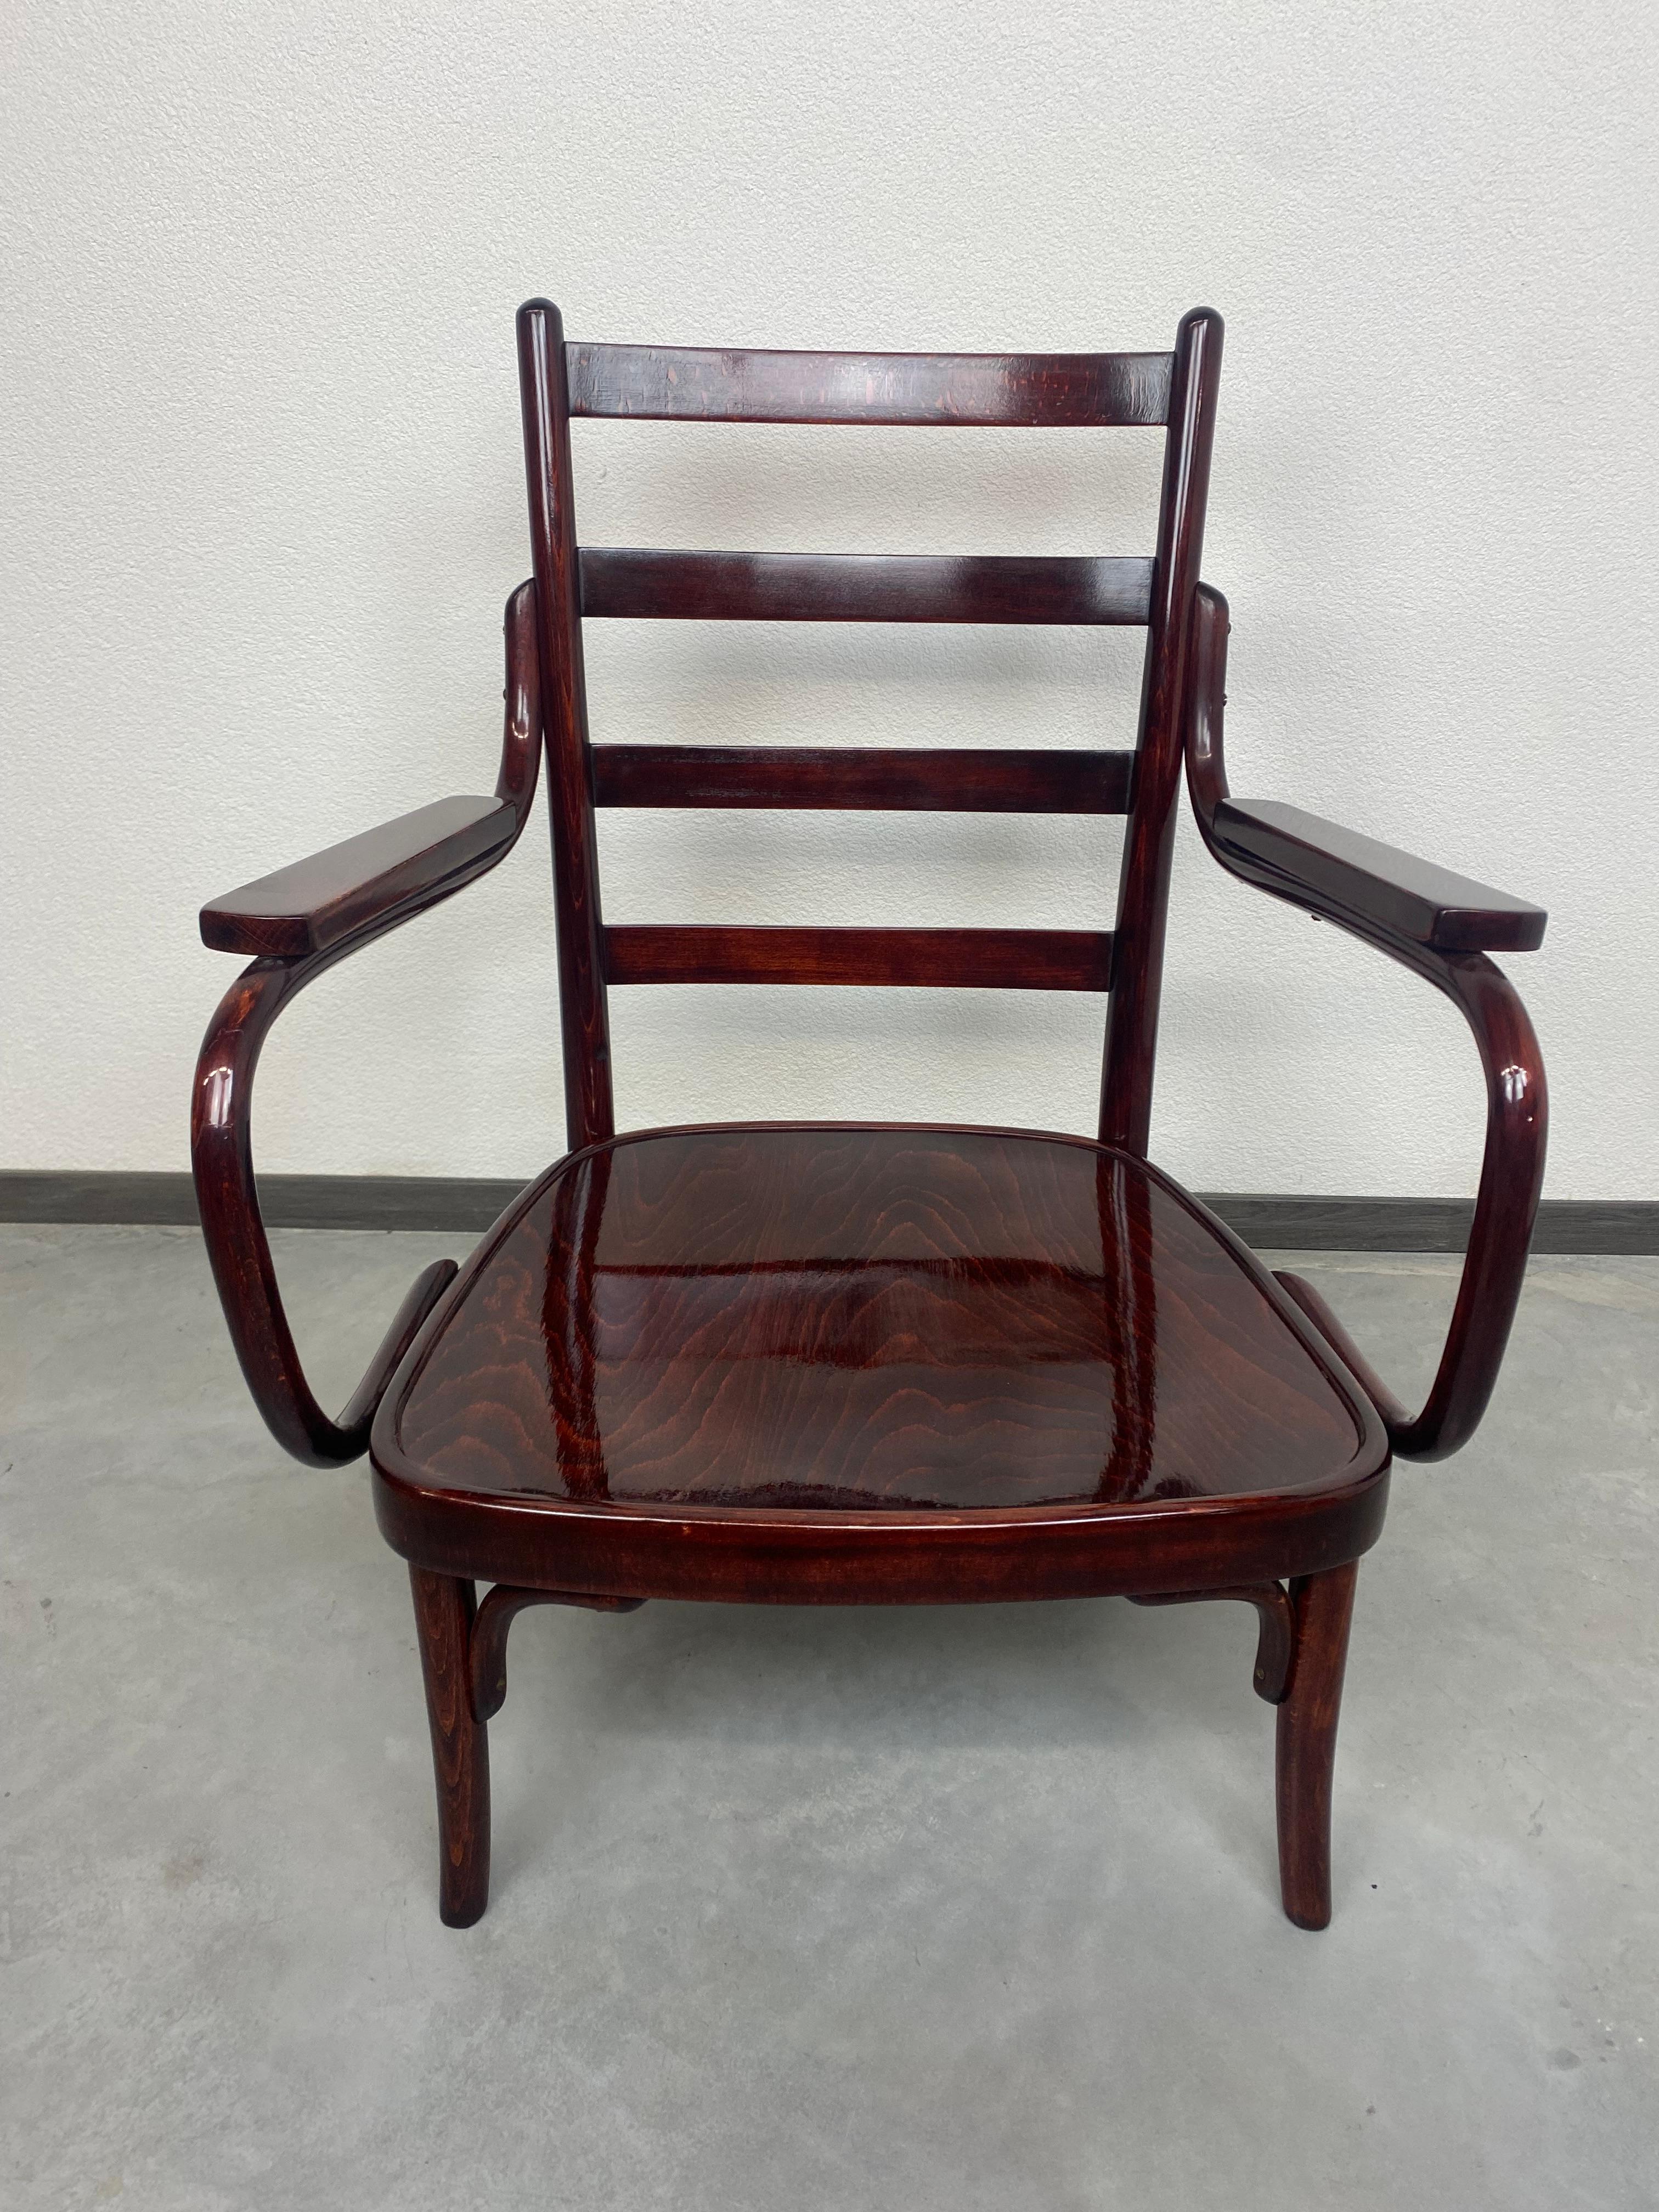 Rare armchair A 403/F by Adolf Schneck for Thonet professionally stained and repolished.